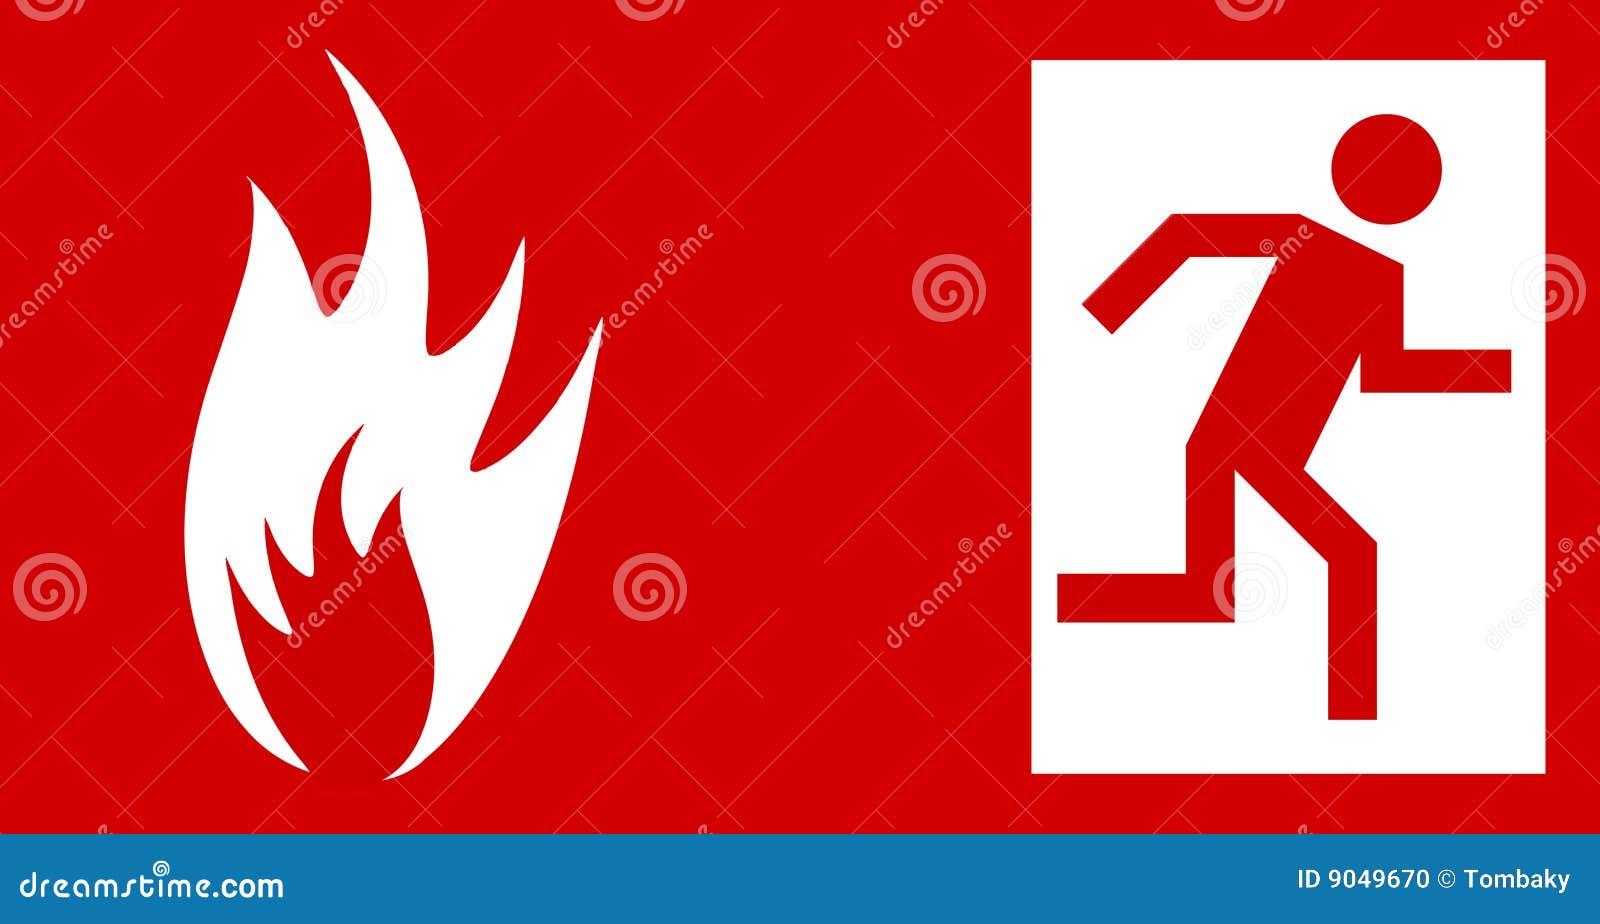 fire emergency clipart - photo #11